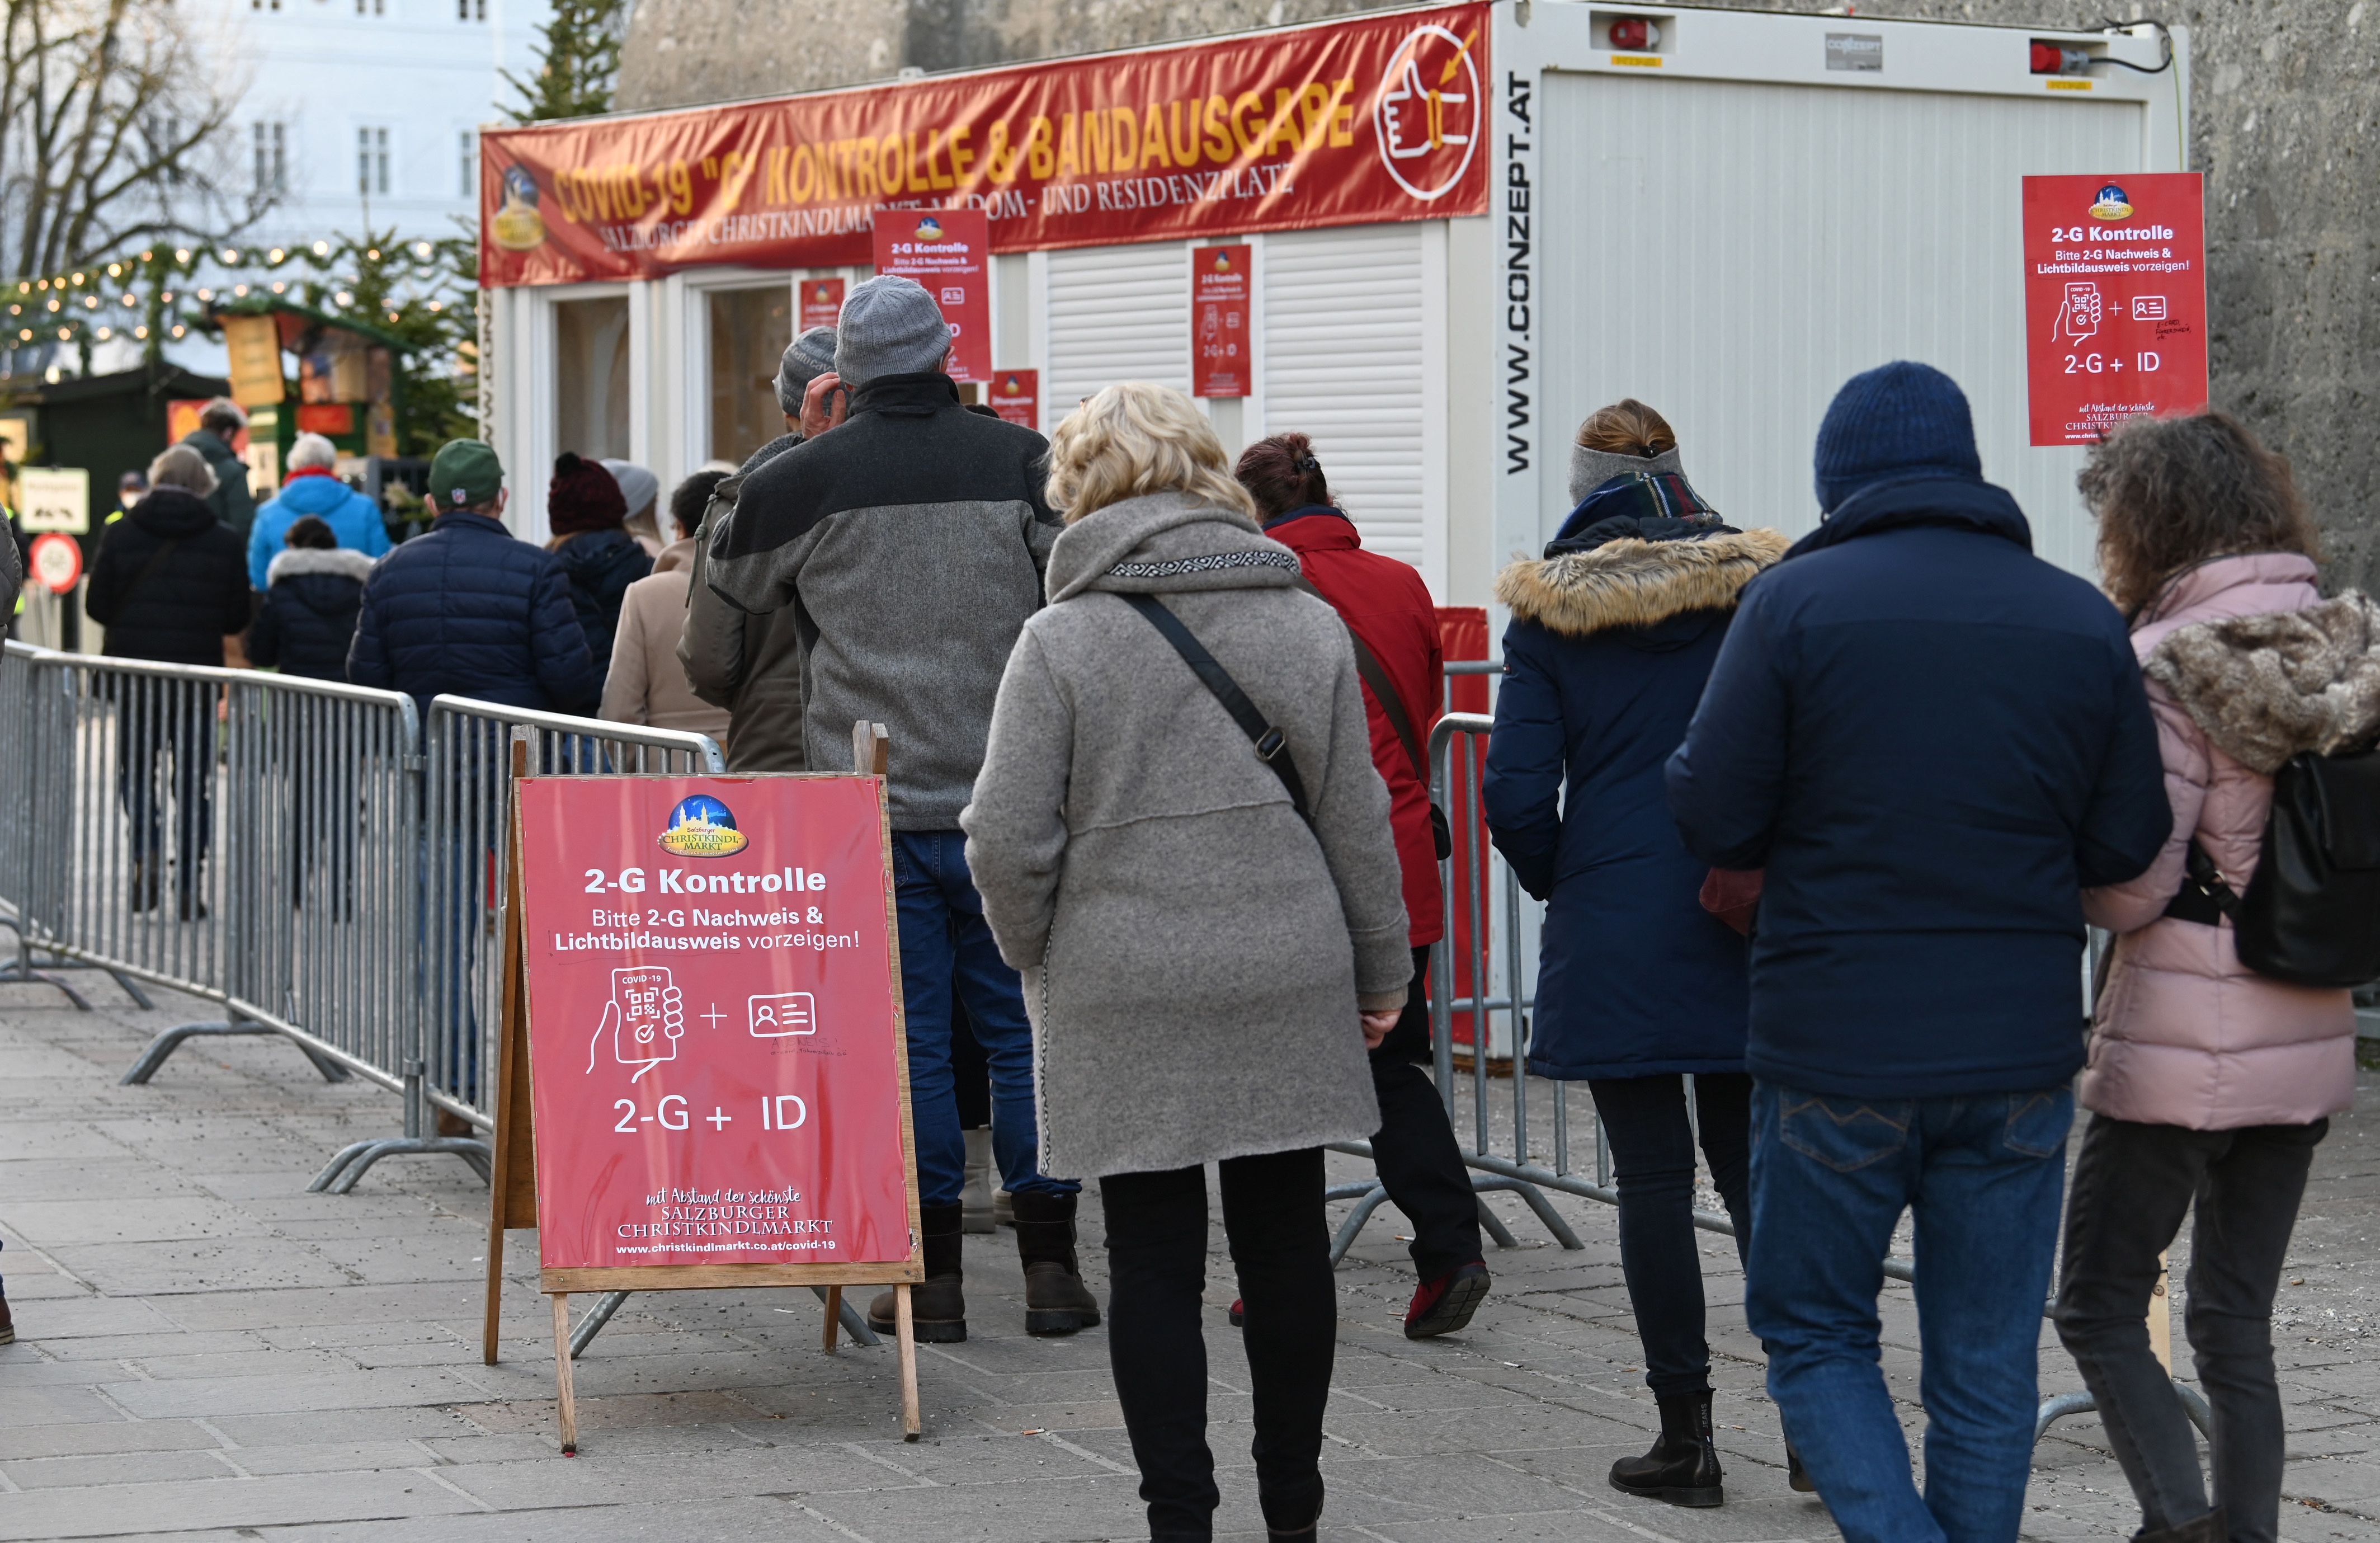 People queue at a vaccine certificate control booth at the Christmas market in Salzburg on December 17, 2021.